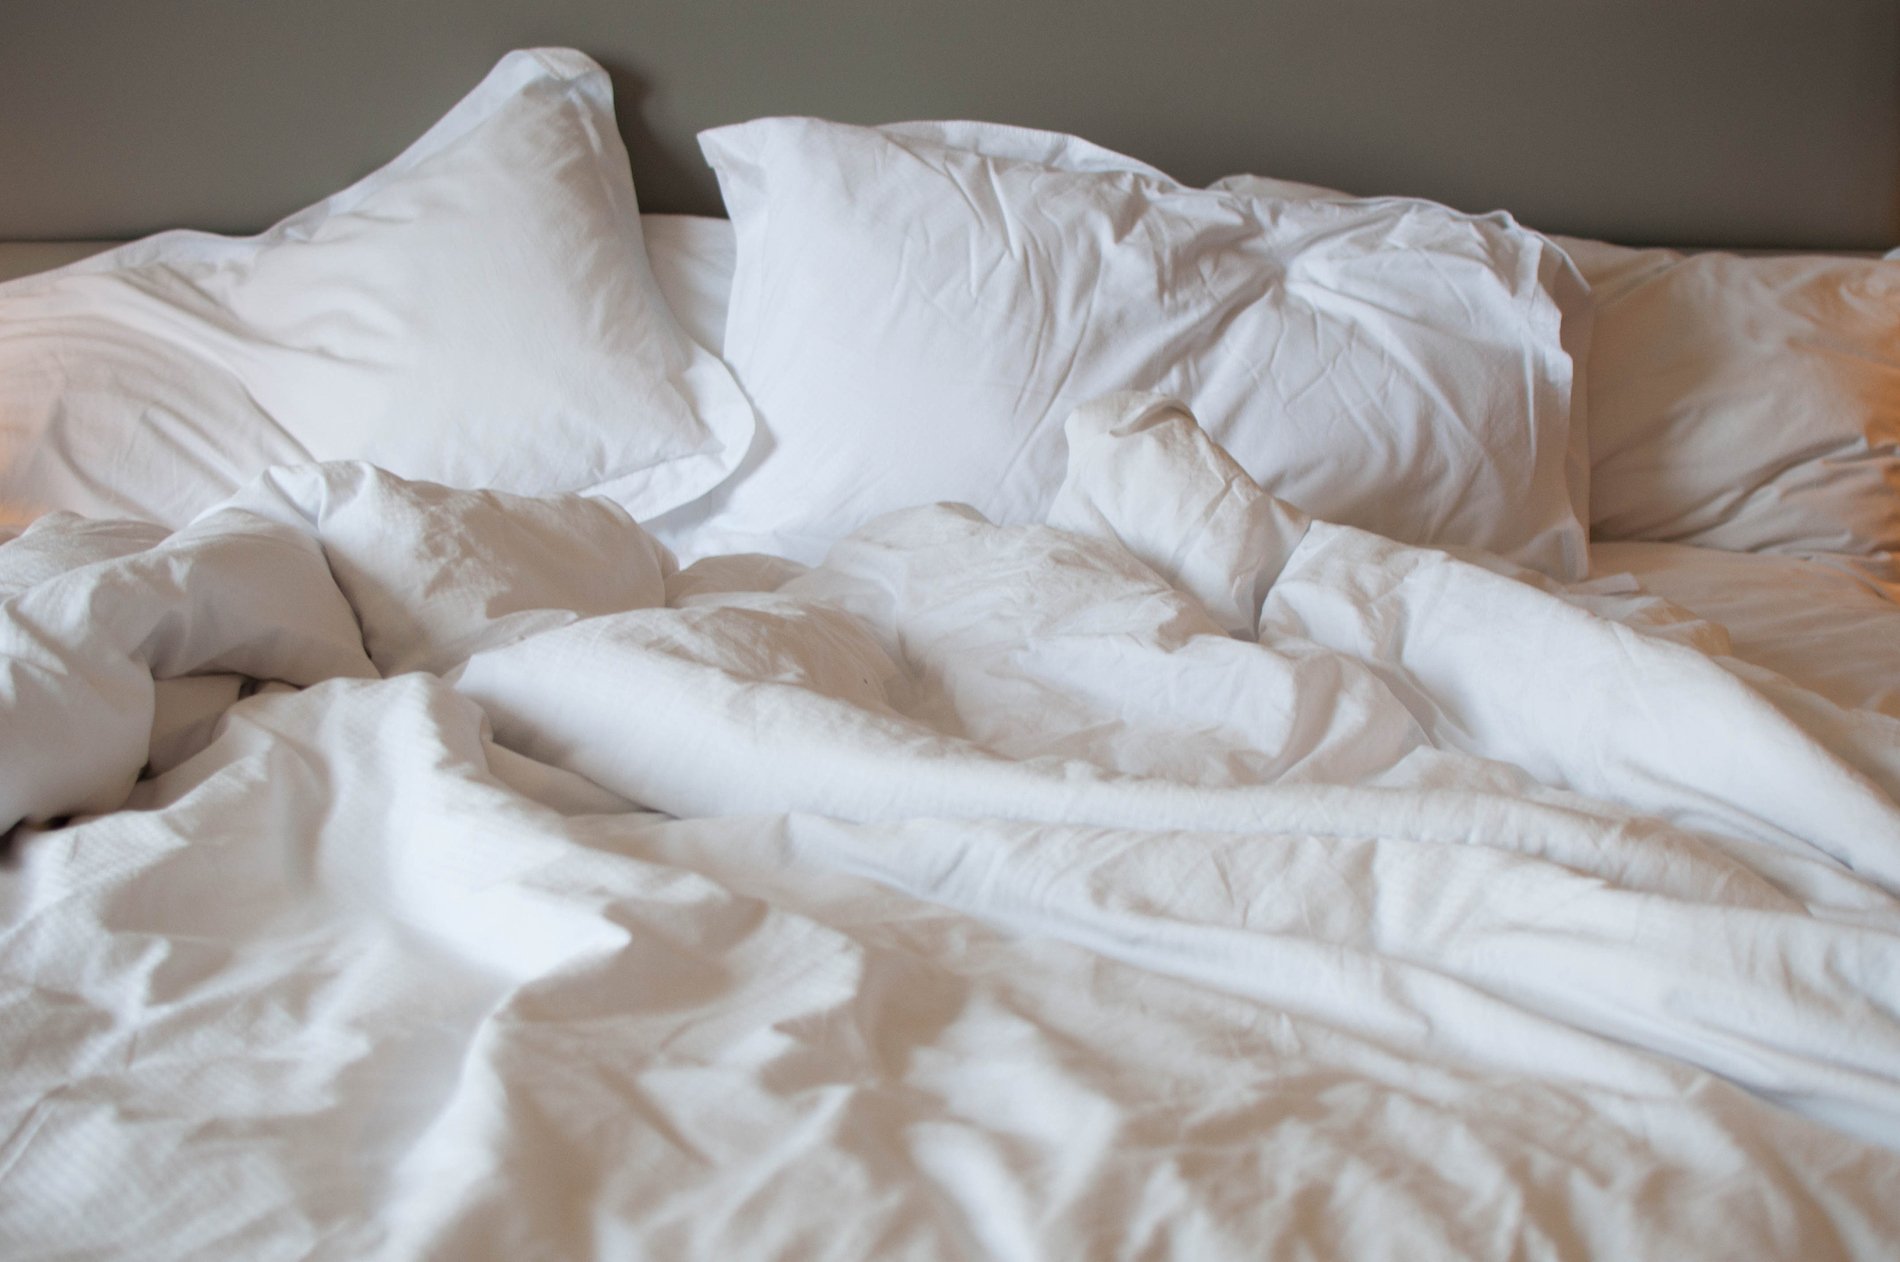 A close-up view of messy bed with comforter and pillows